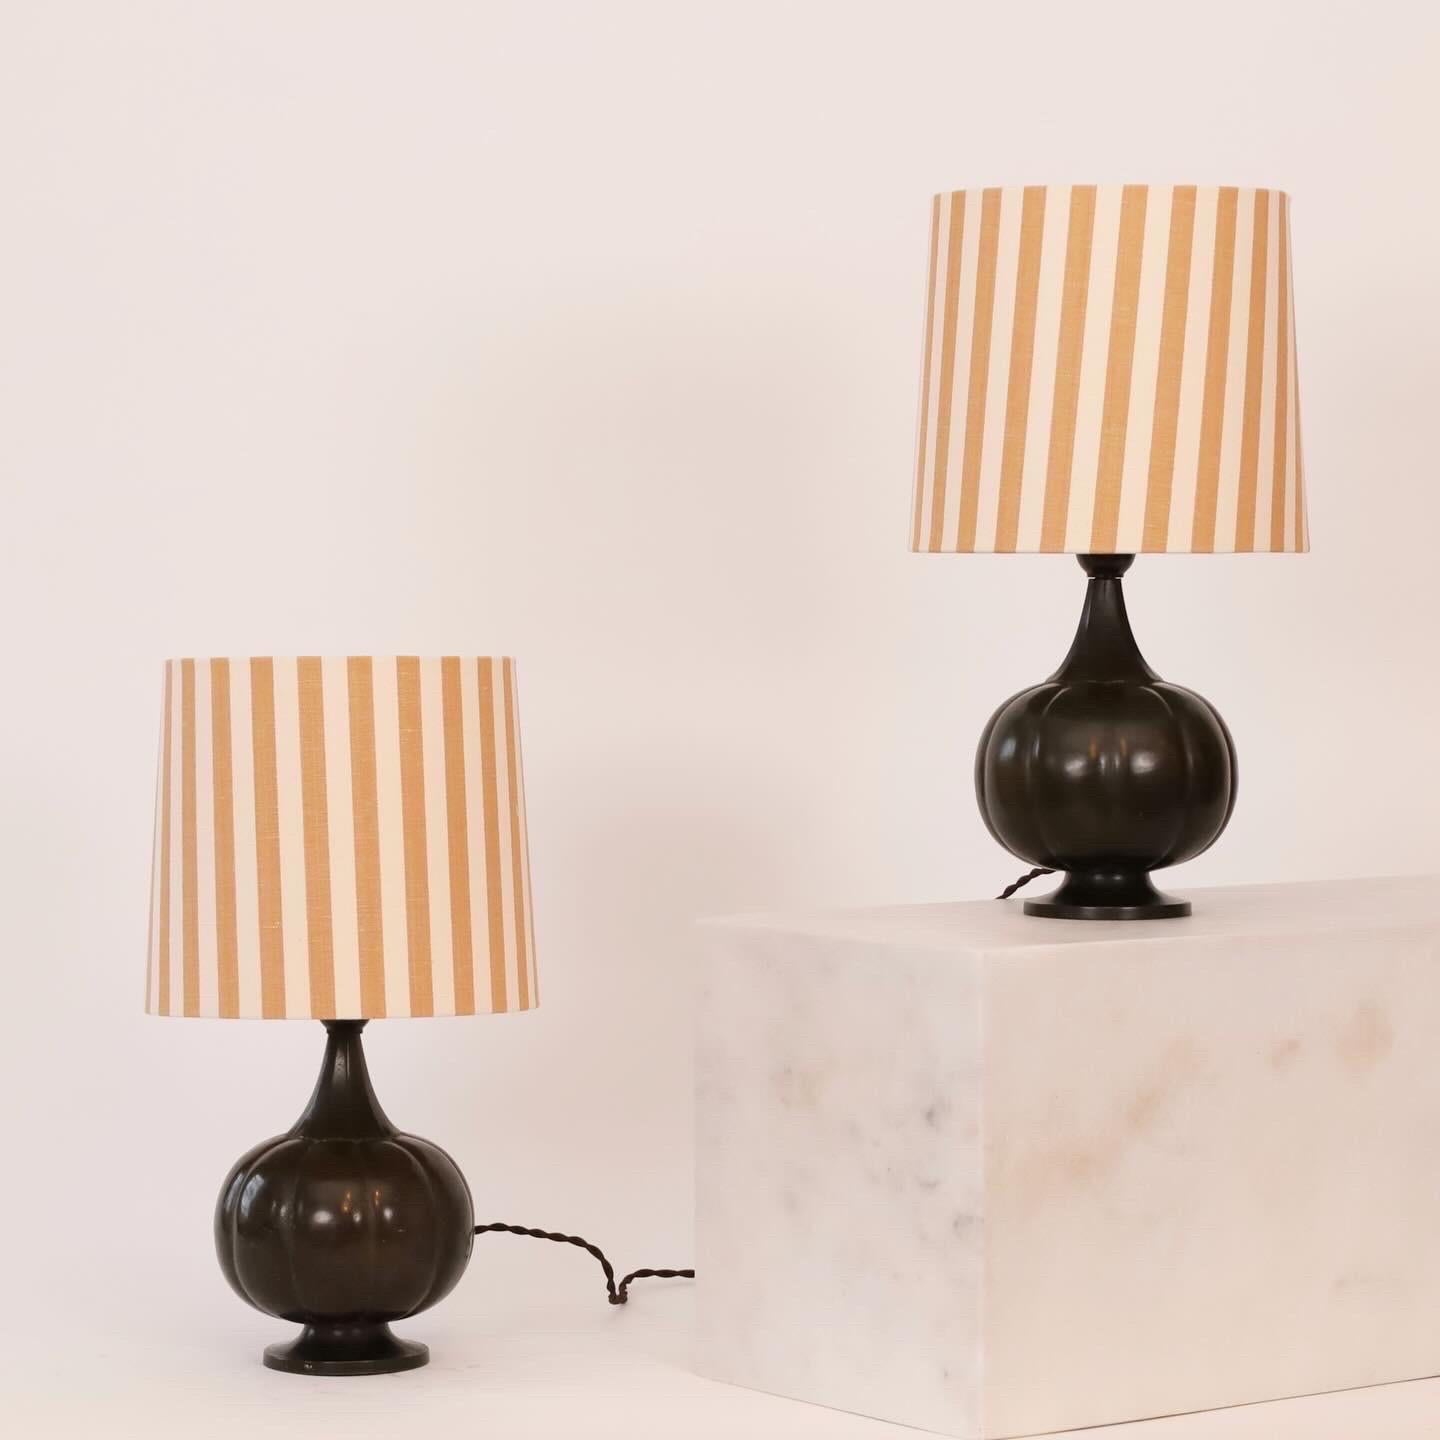 Set of 1920s pumpkin-shaped table lamps by Just Andersen accomplished with new shades in artisan textile from Mallorca. A rare set for a beautiful home.   
 
* Set of metal desk lamps with a pumpkin-shaped bases on foot and fabric shades with